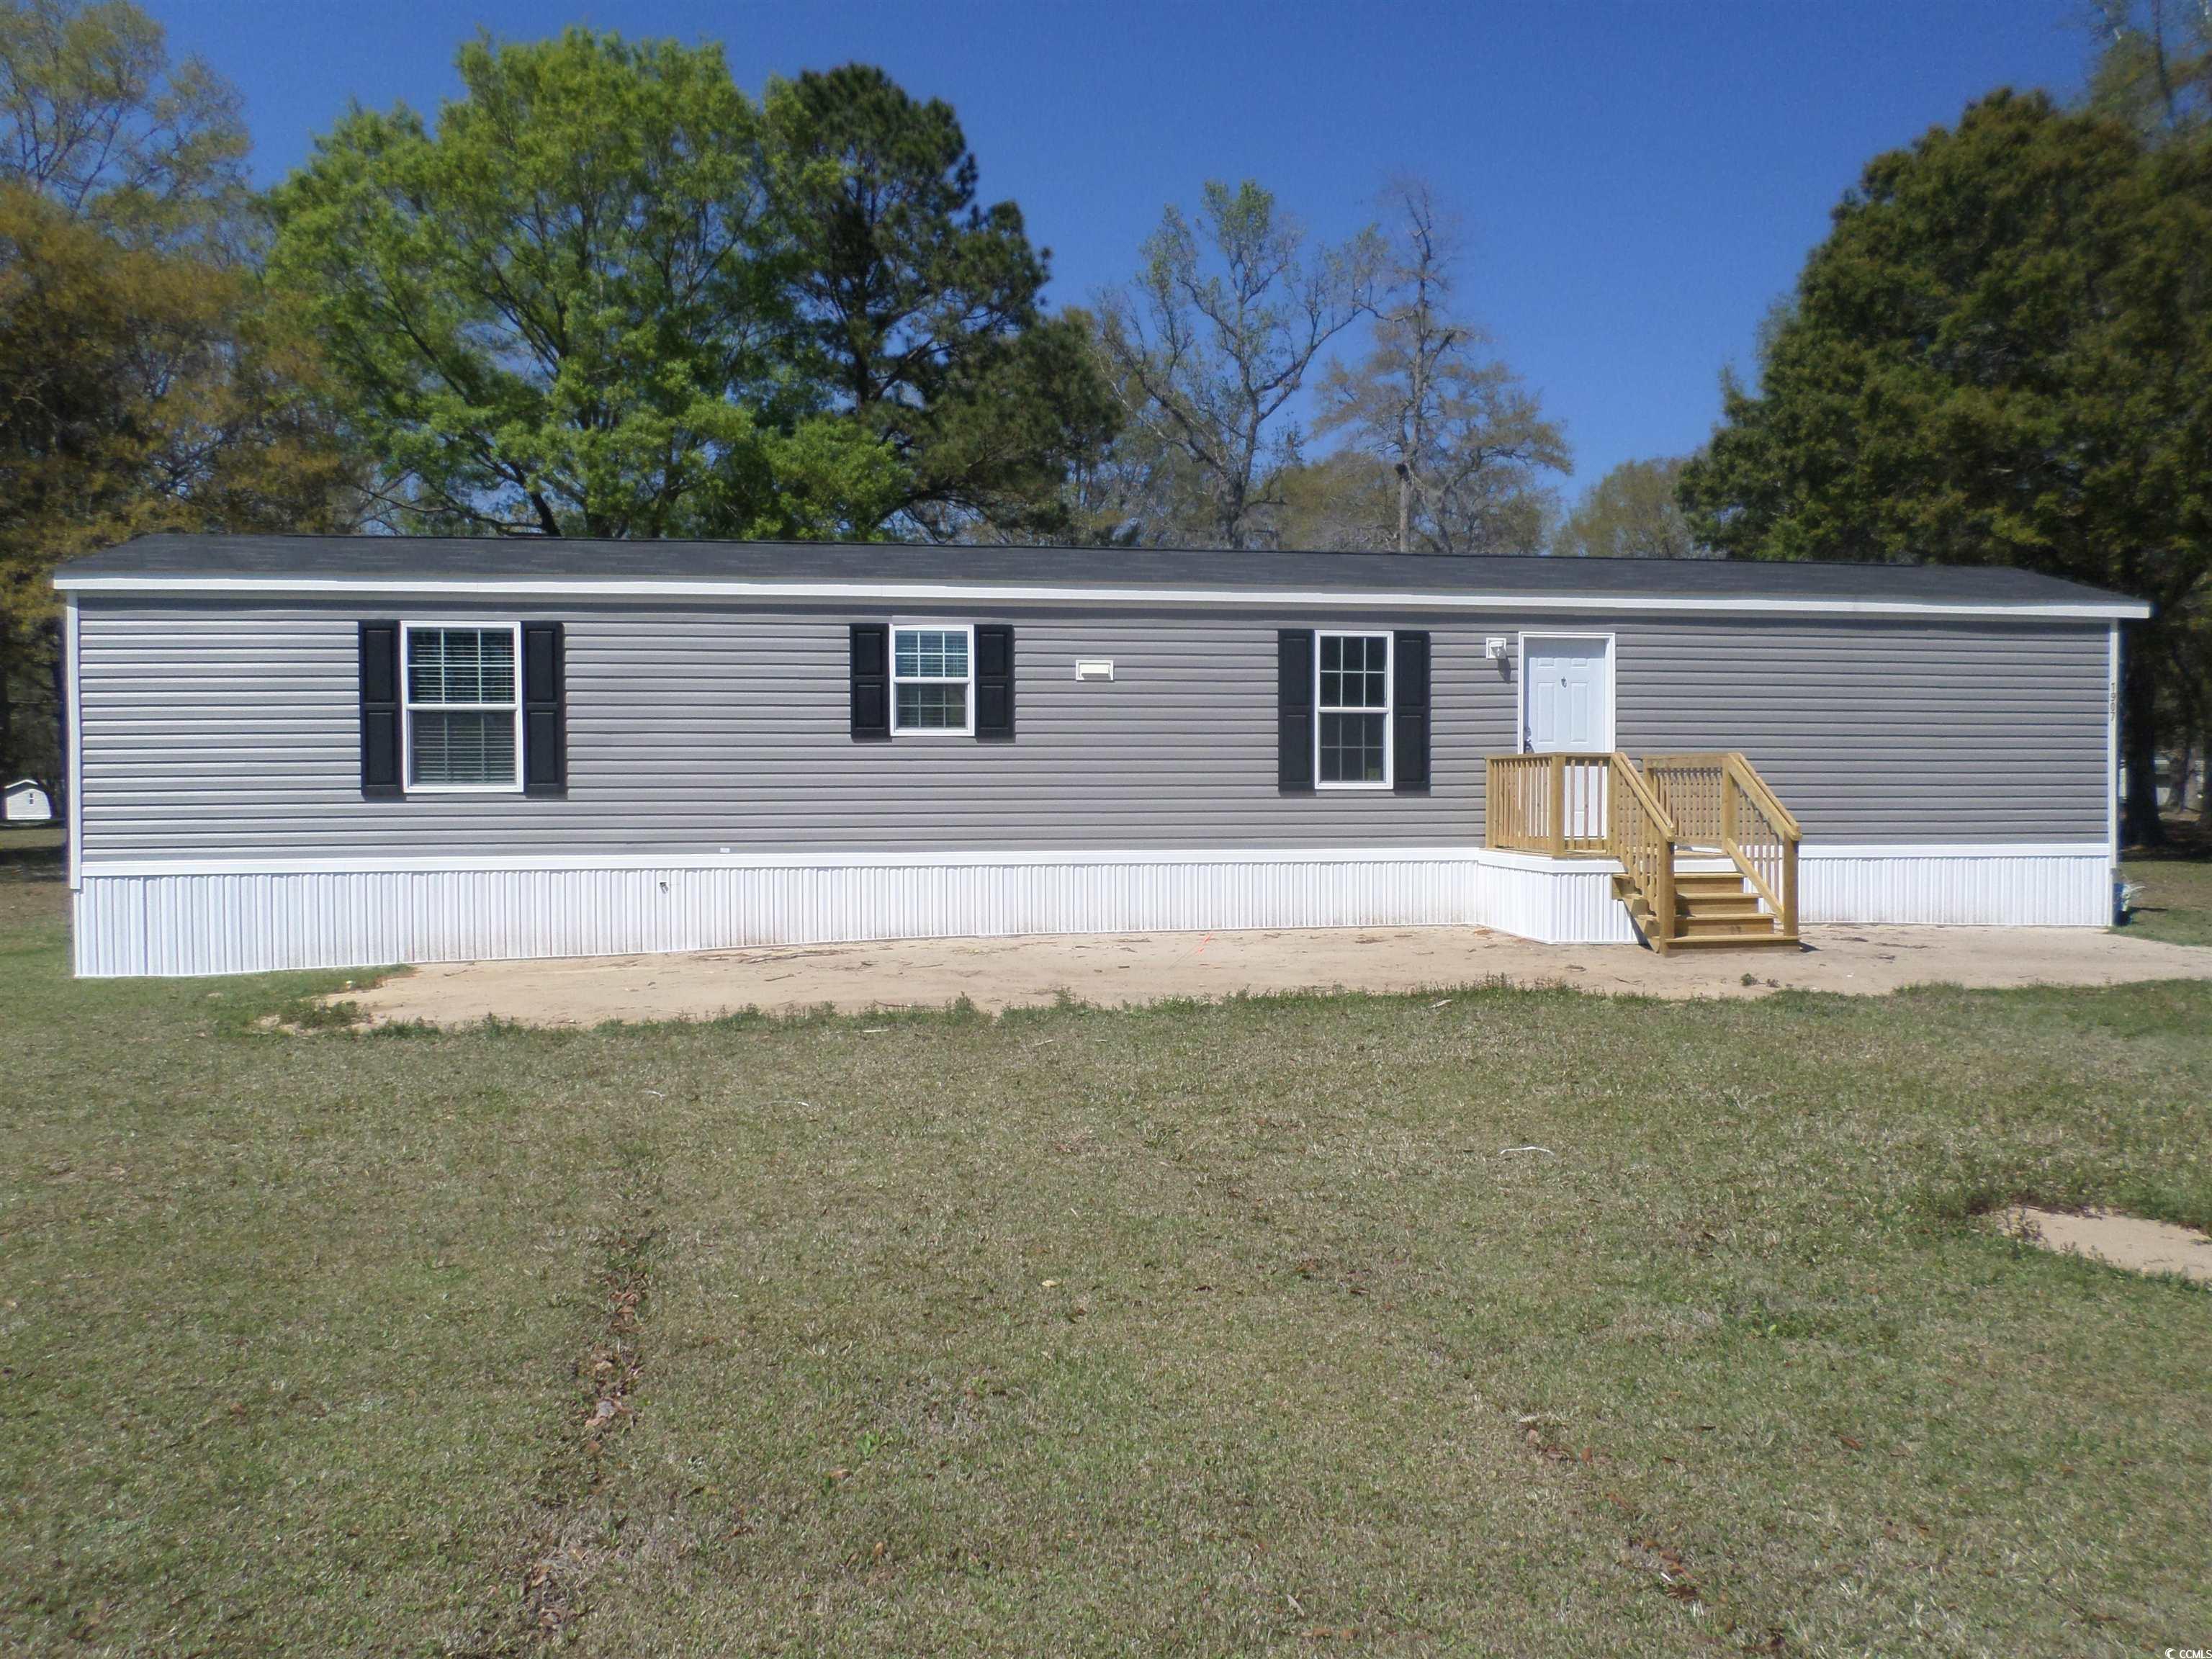 price improved!  affordable 2024 new 2 bedroom 2 bath singlewide manufactured home is set up in the leased land community of williamson's estate, conway, sc. the home has an appliance package to include microwave, dishwasher, range and refrigerator,  split bedroom floor plan with master ensuite, tub/shower combination and the home is plumbed for washer and dryer hook ups.  the open floor space is great for entertaining guests.  the kitchen dining room combination flows nicely together and the lovely vinyl flooring is easily maintained throughout the home.  two decks are constructed on the front door entry and rear door exit.  the lot has plenty of room for a storage building.   this home is affordable and the manufacturer offers a one year warranty. a must see today.